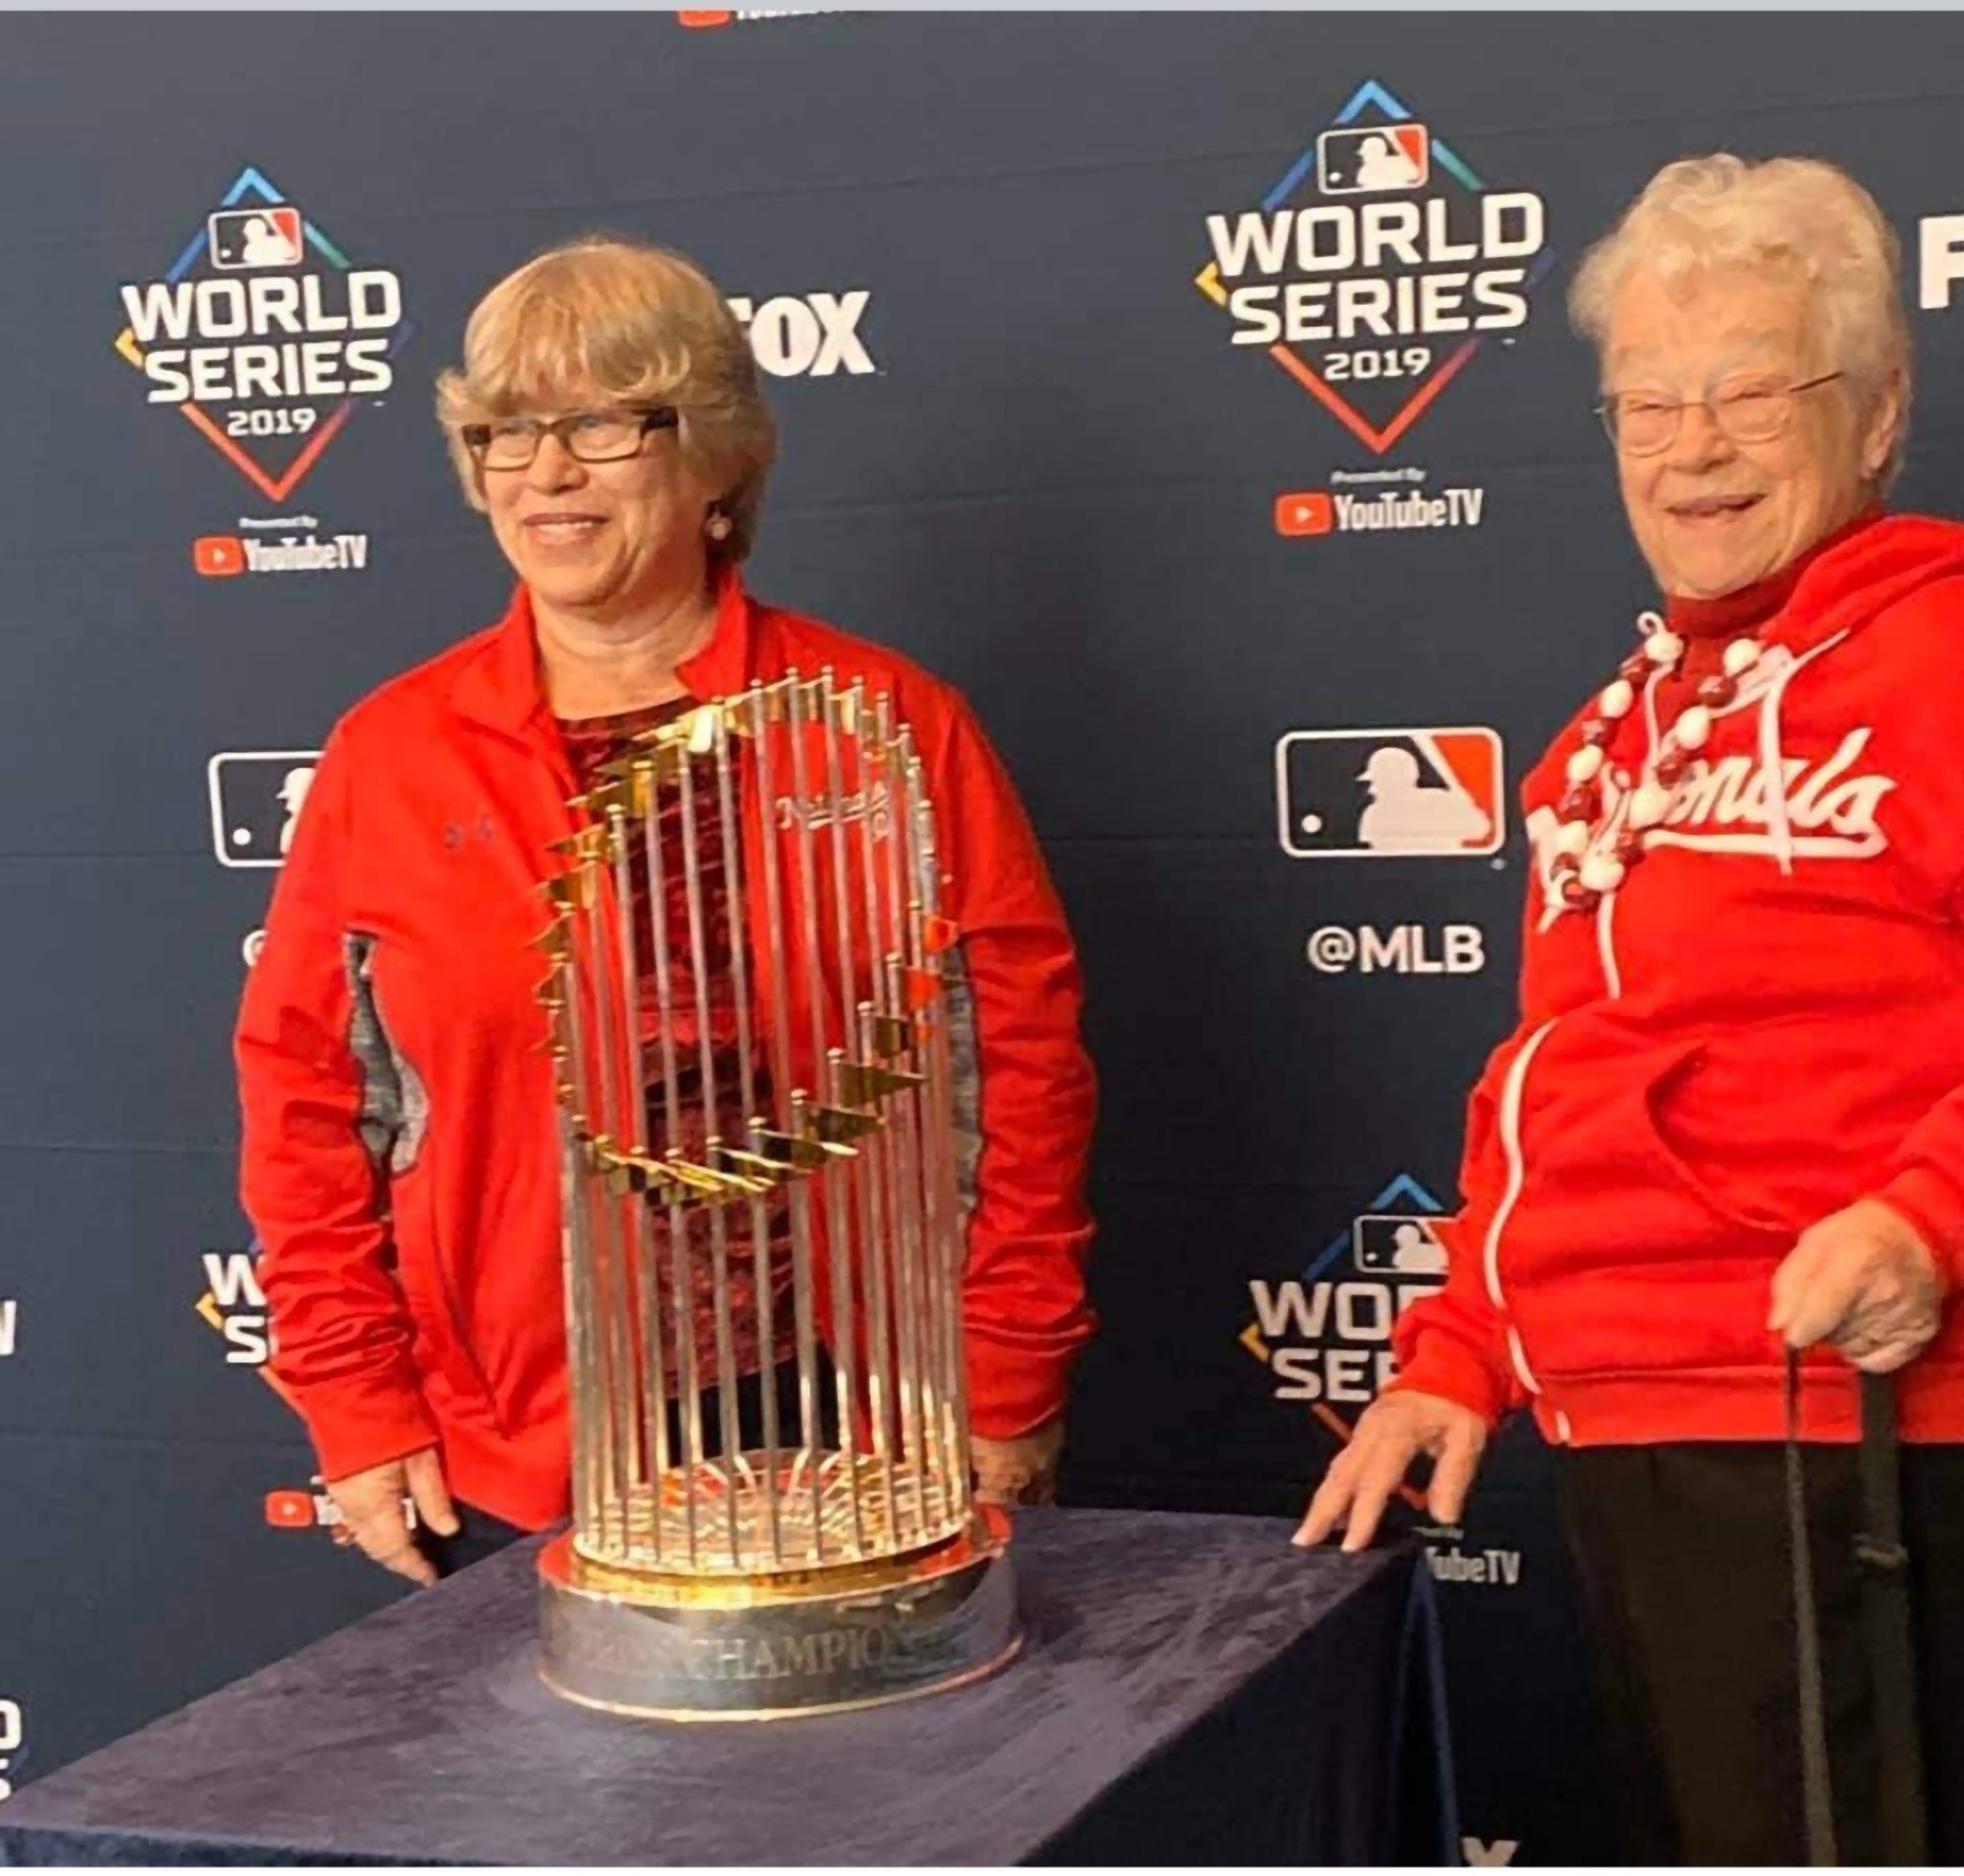 Anna Leider and mom Kit Leider. Of this photo Anna had remarked at the time, "The World Series trophy is a lot bigger than I expected." (Photo: Leider Family Collection)